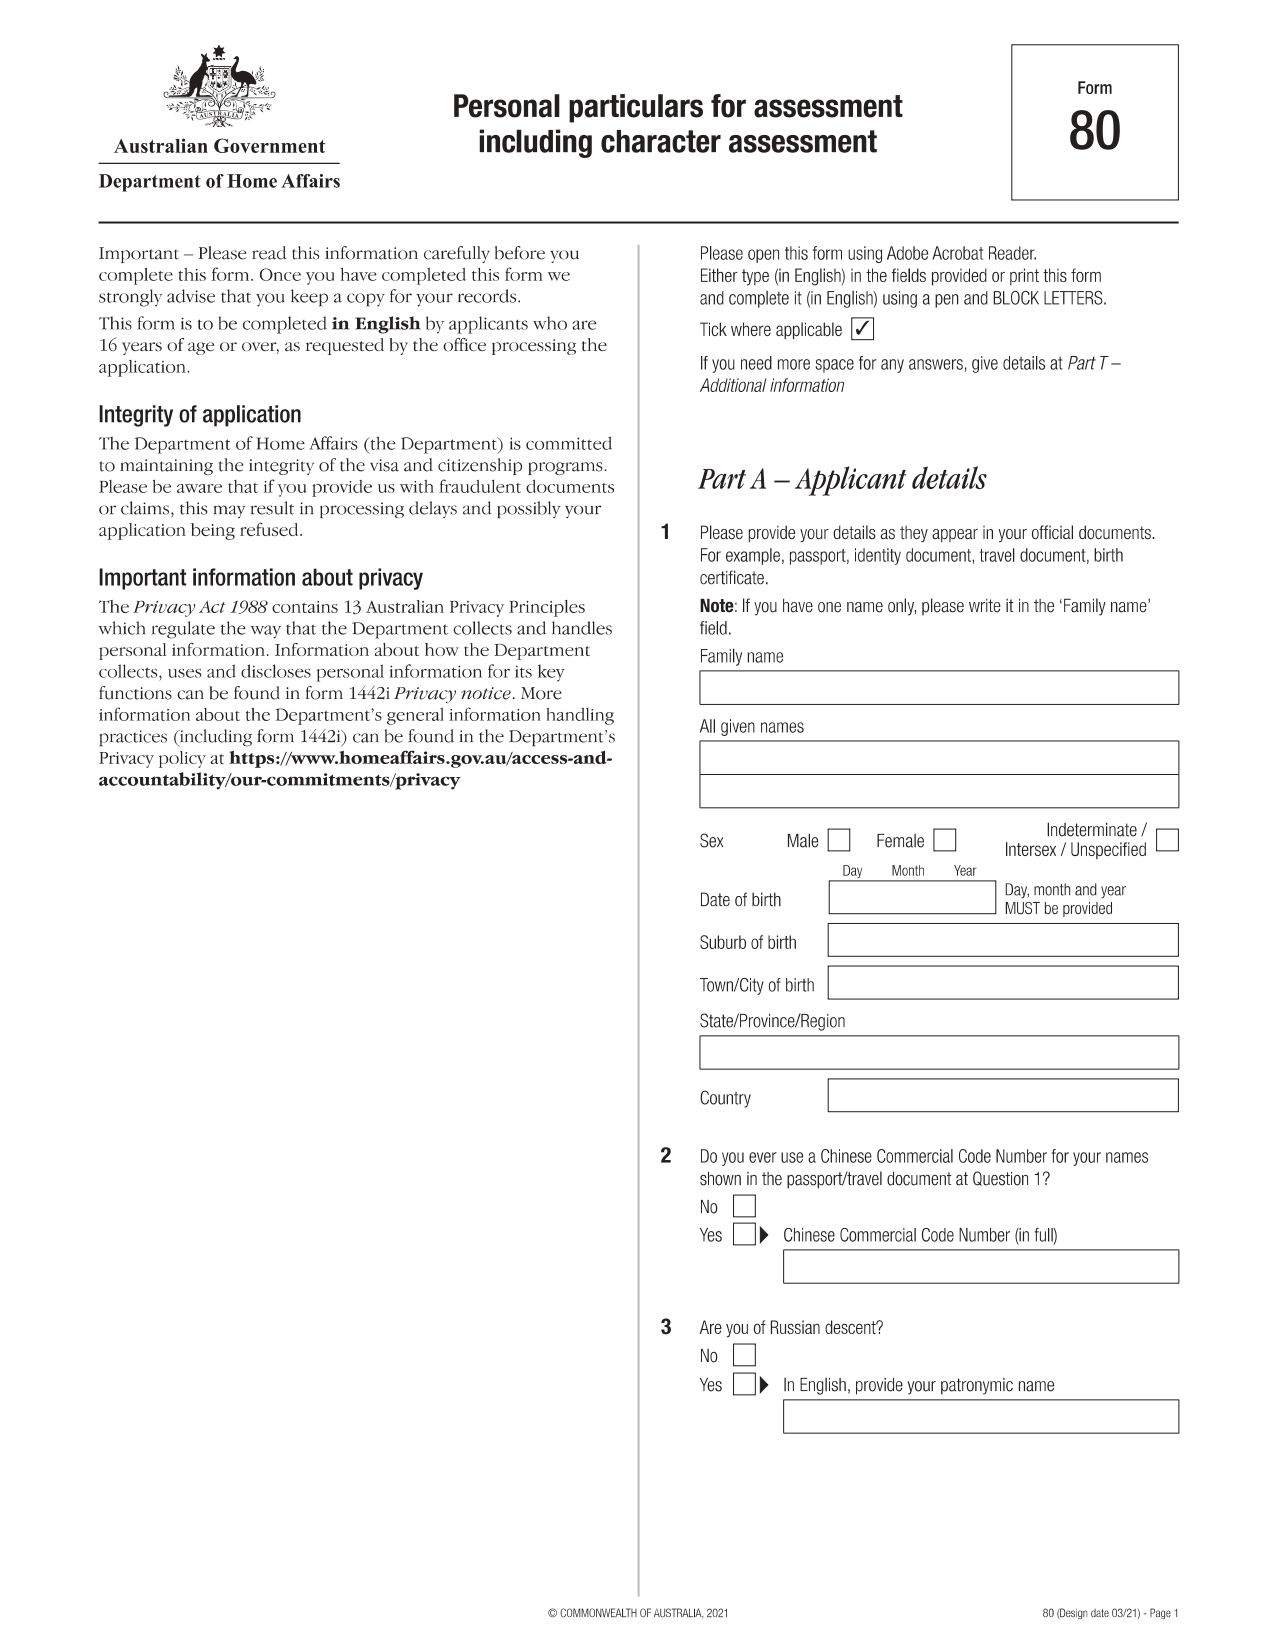 Partner Visa Form 80: What it is and When to Fill them [With Sample]